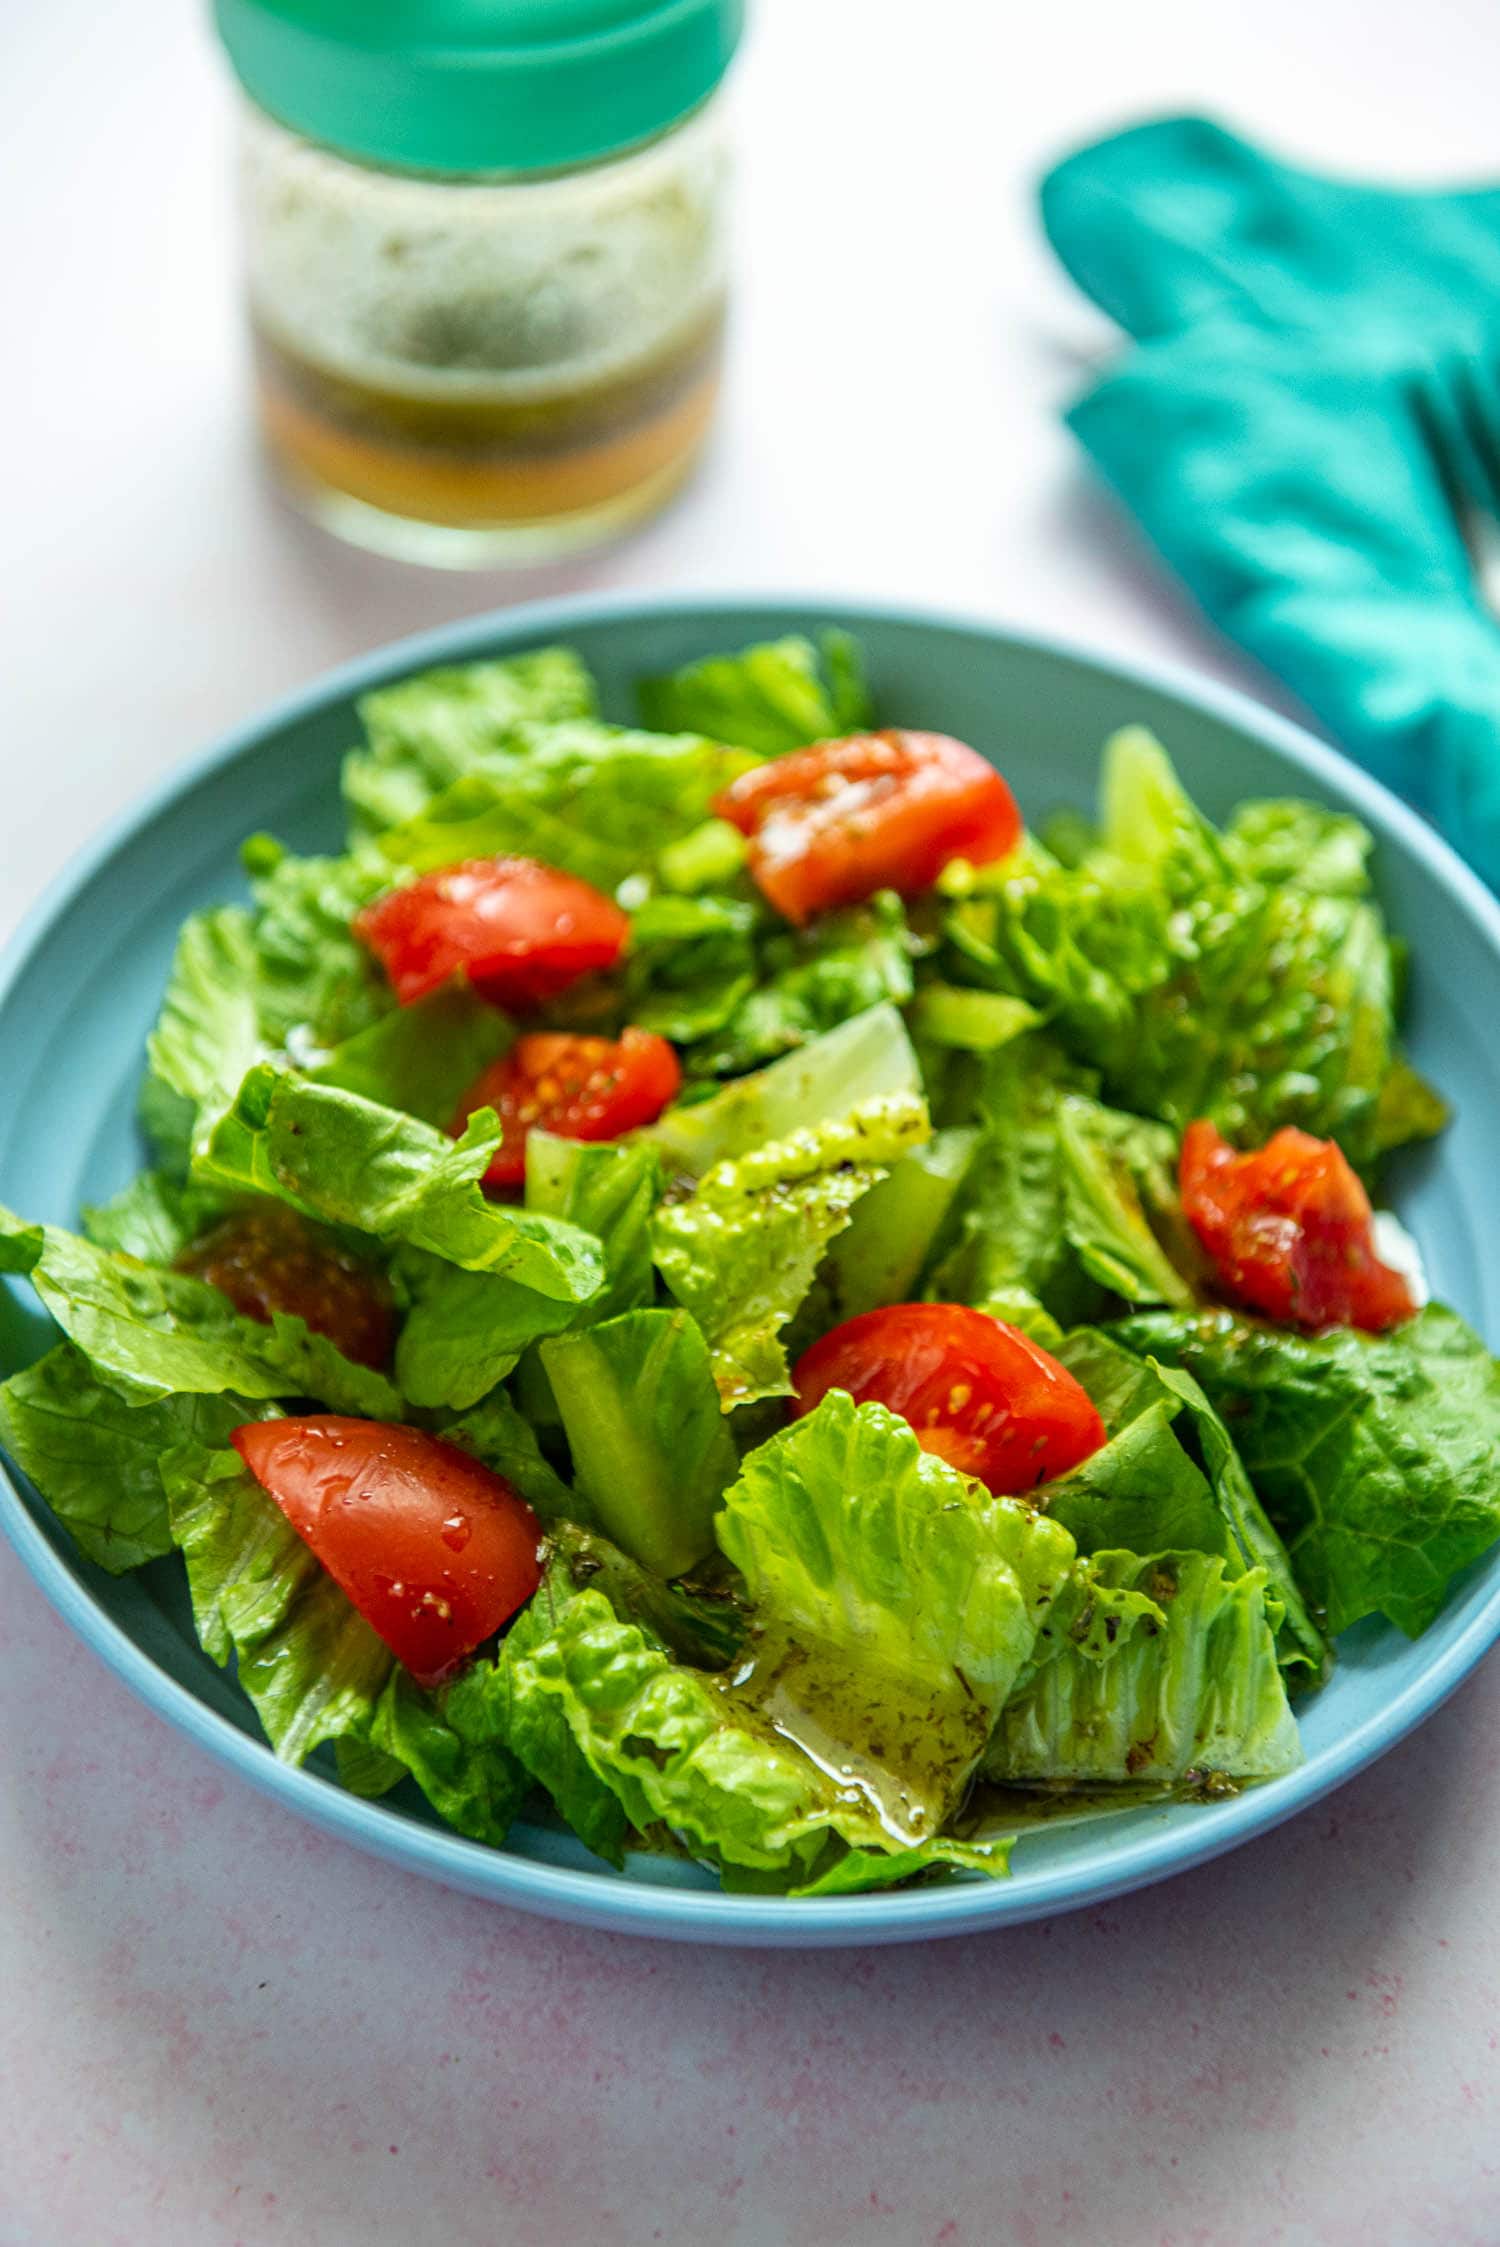 chopped romaine lettuce and chunks of tomato on blue plate with Italian dressing